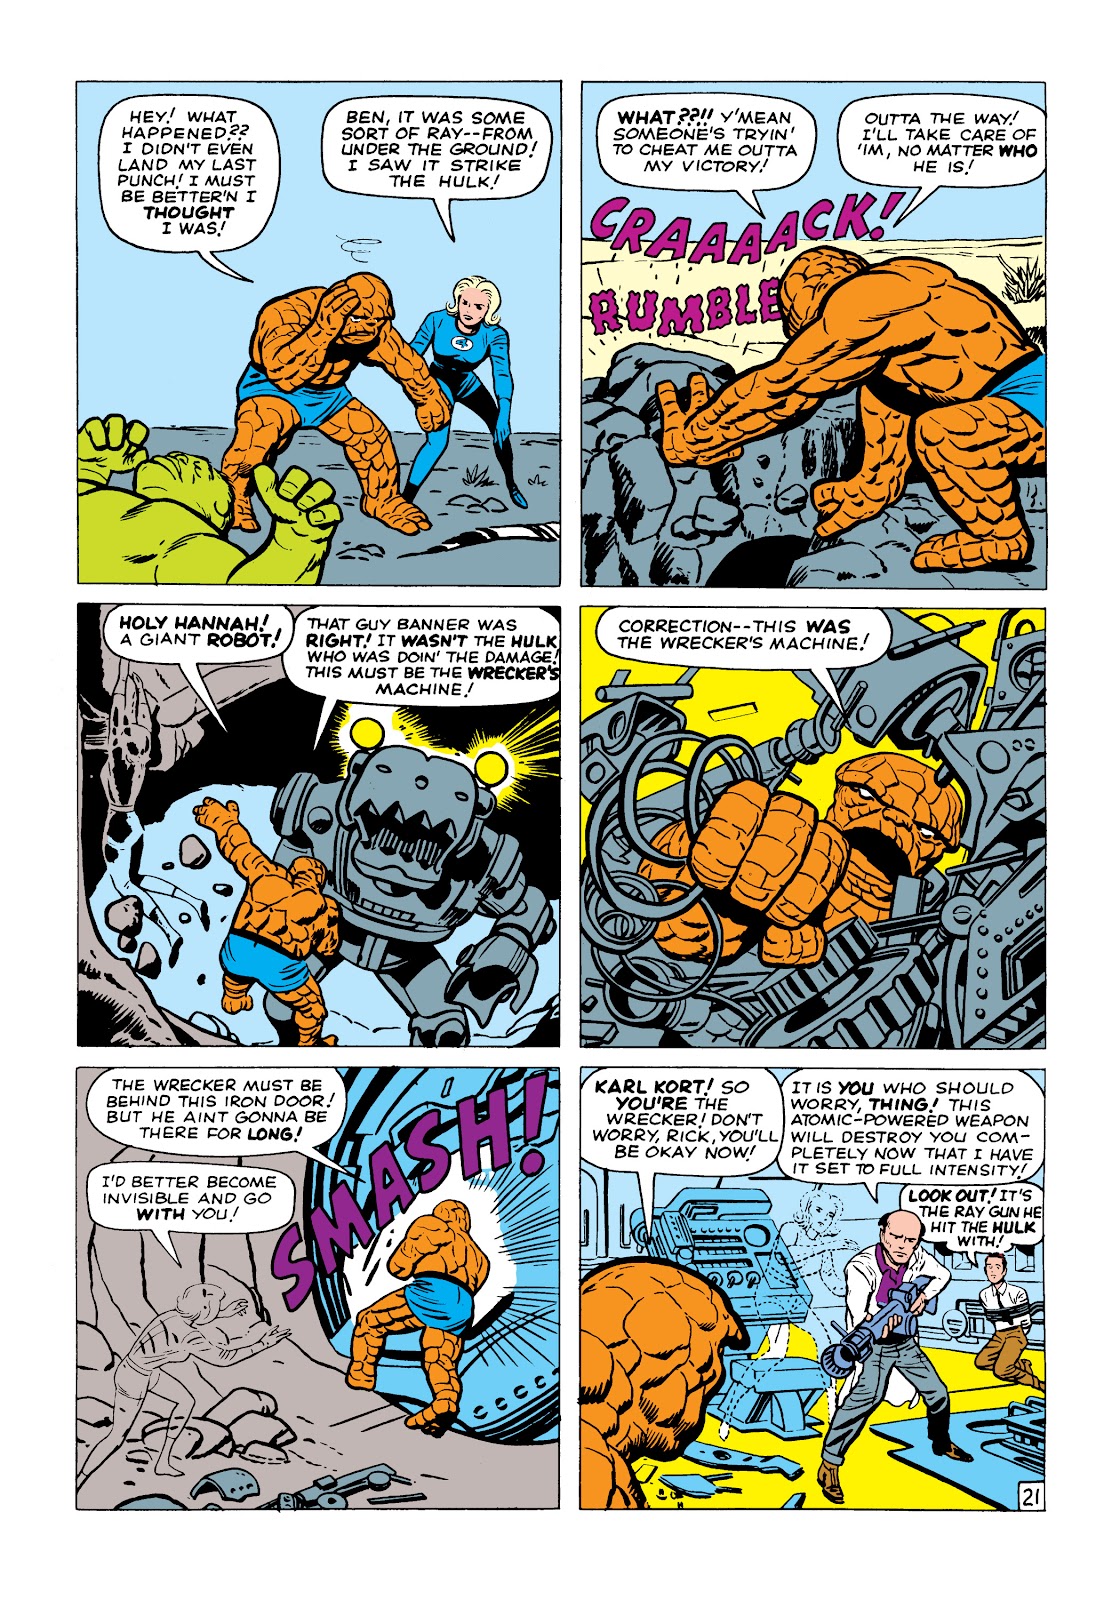 Read online Marvel Masterworks: The Fantastic Four comic - Issue # TPB 2 (Part 1) - 51